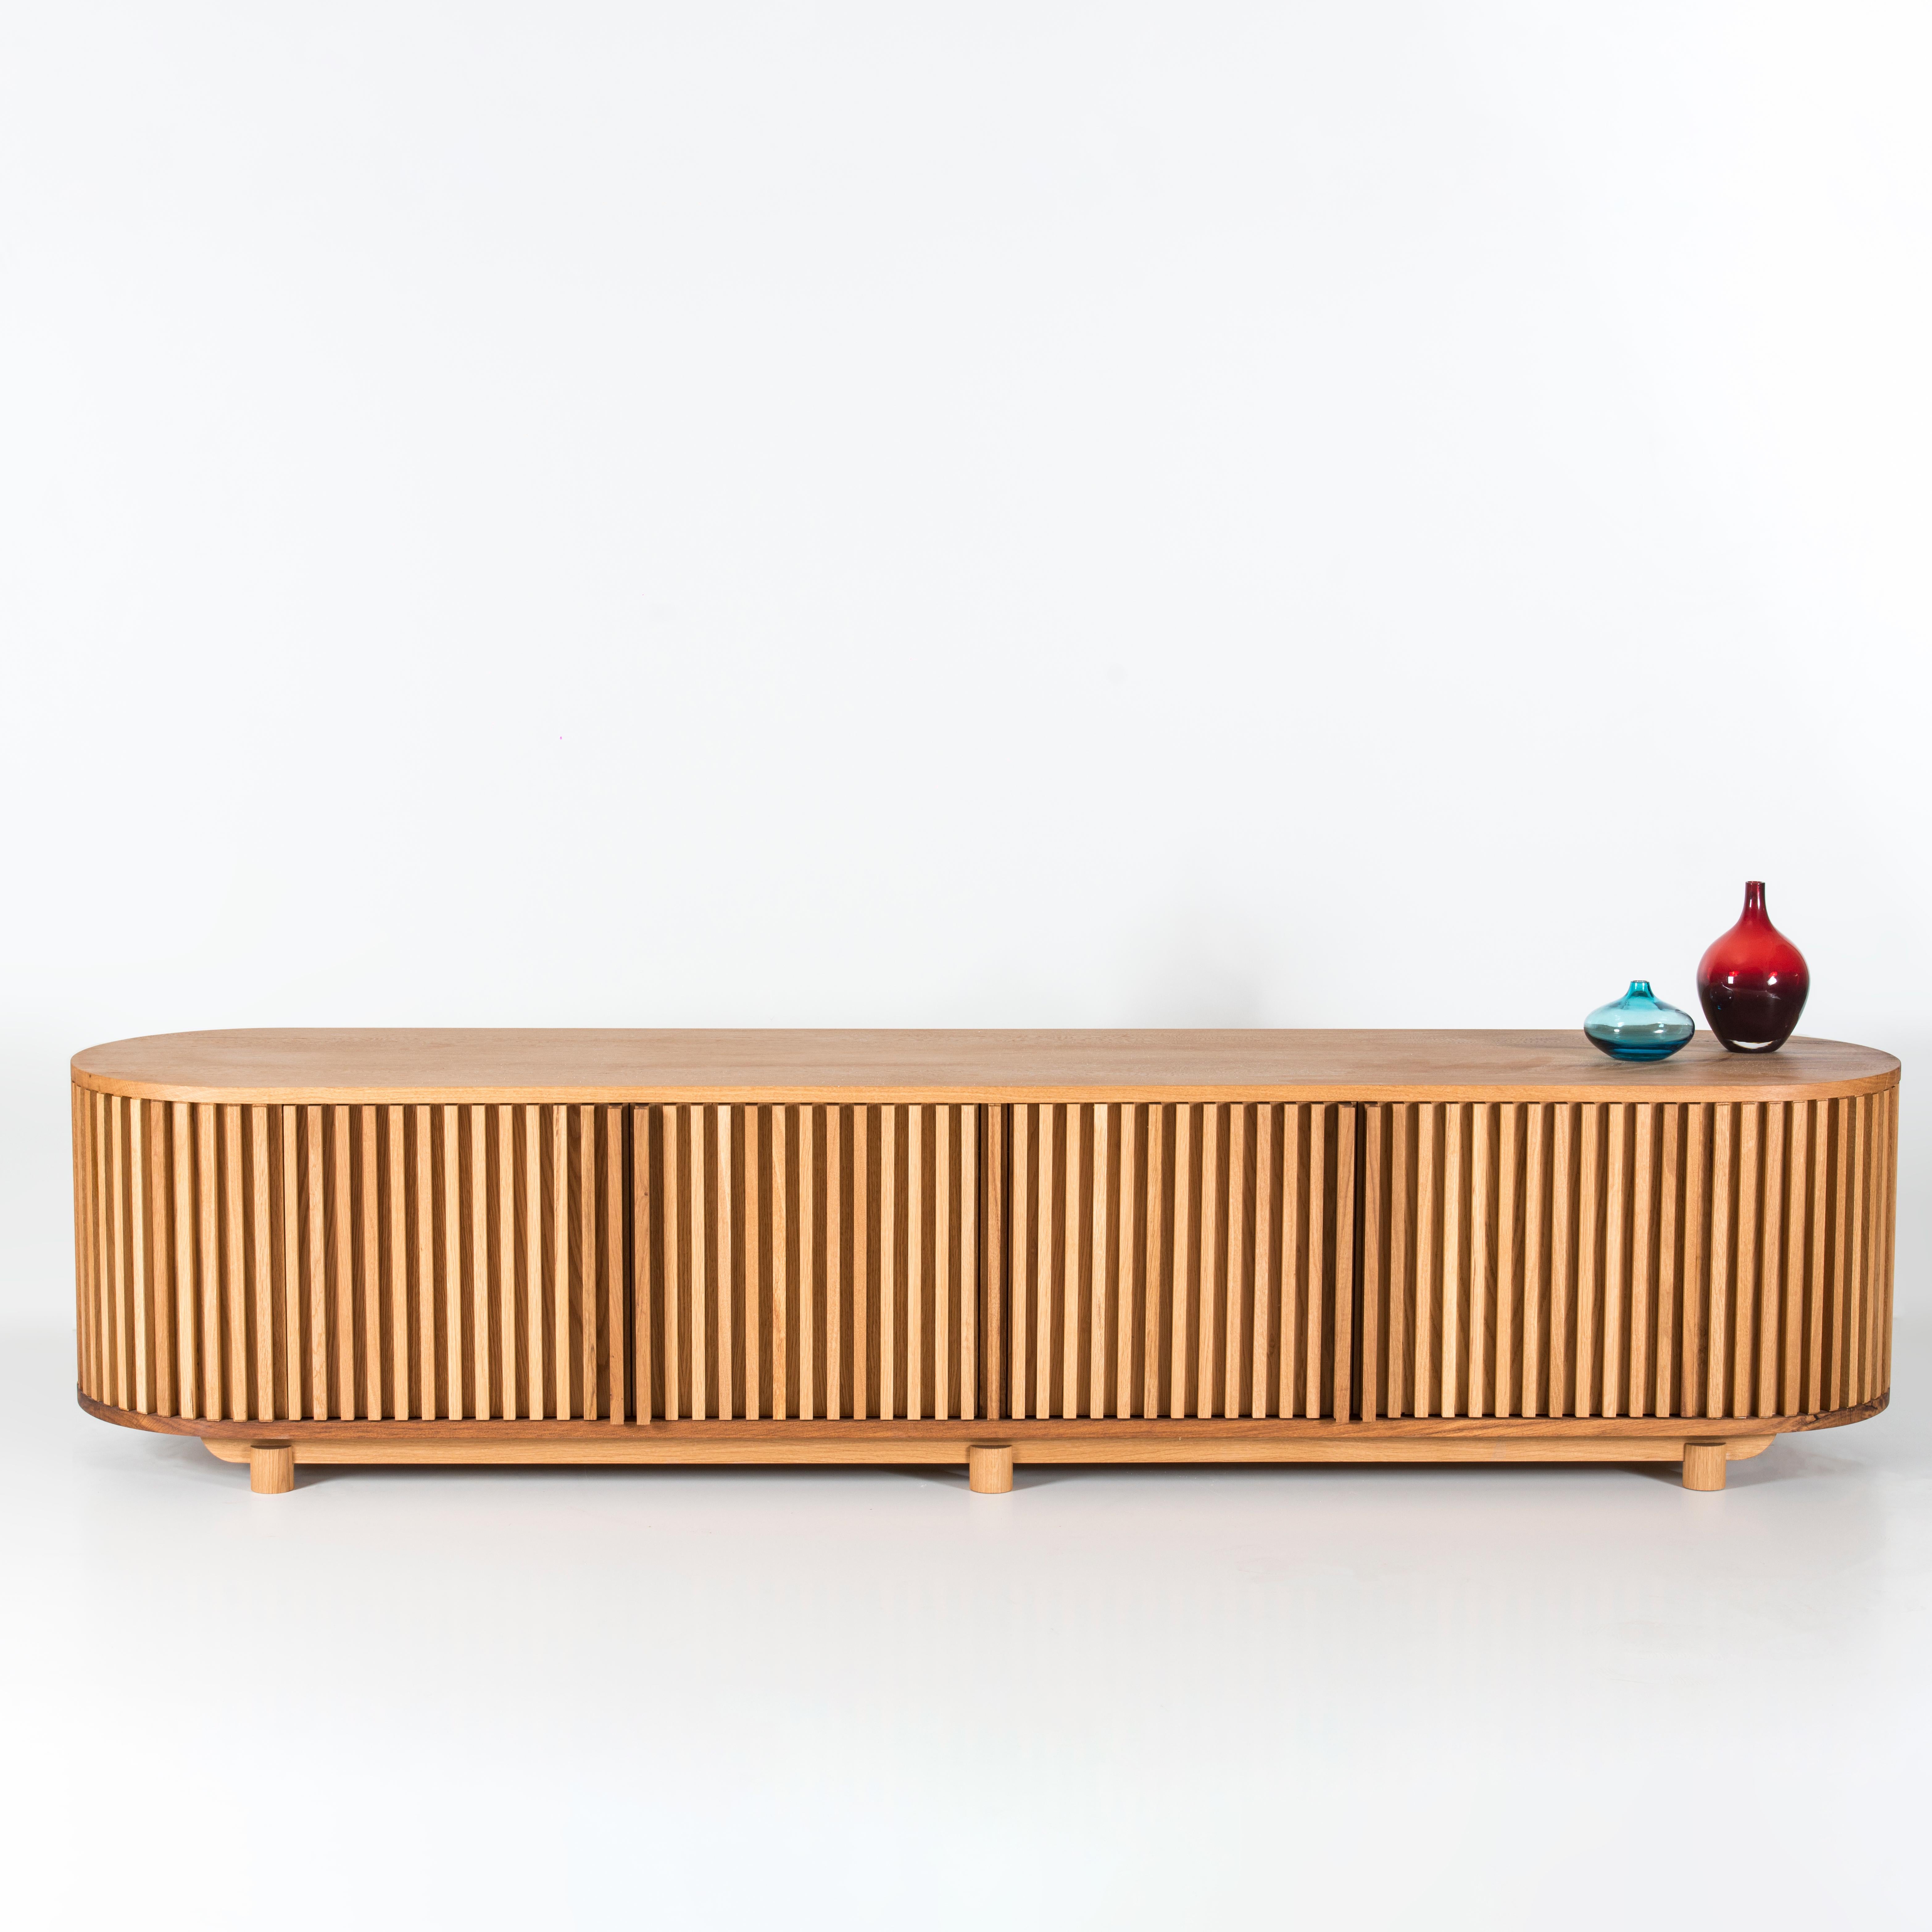 - This TV unit, all the surfaces of which are made of oak wood, suits different styles and both divides the room and provides a large storage area. 
-The DOCIA TV Unit, composed of independent slats, serves as storage space in its lower section.